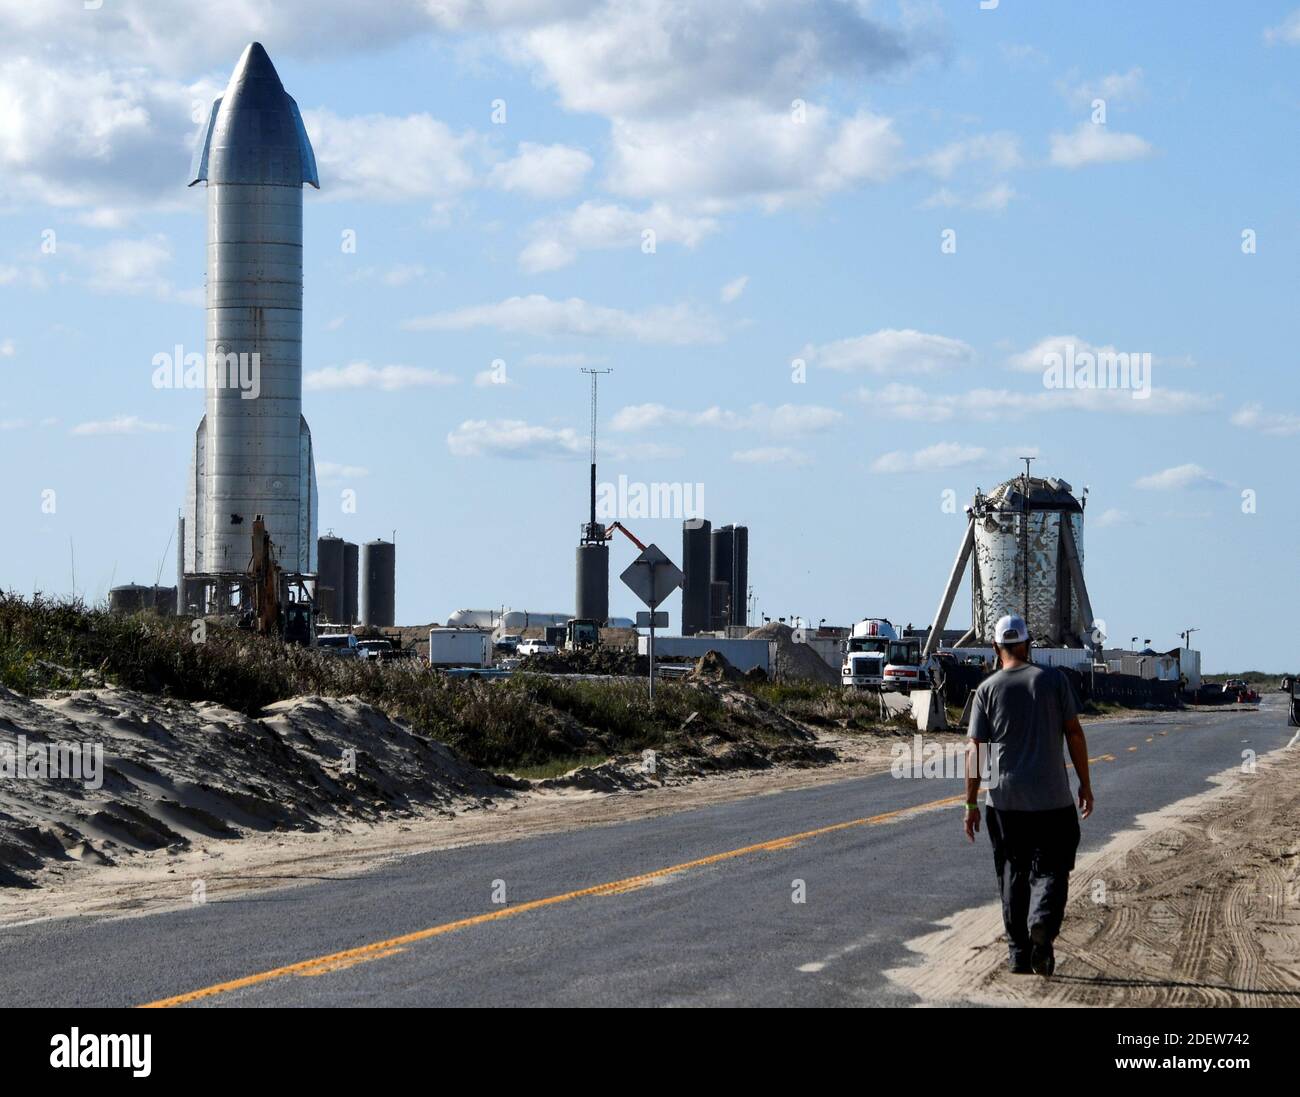 A space buff checks out the test sight as SpaceX prepares their super  heavy-lift Starship SN8 rocket for a test launch this week at the company's  facilities in Boca Chica, Texas, U.S.